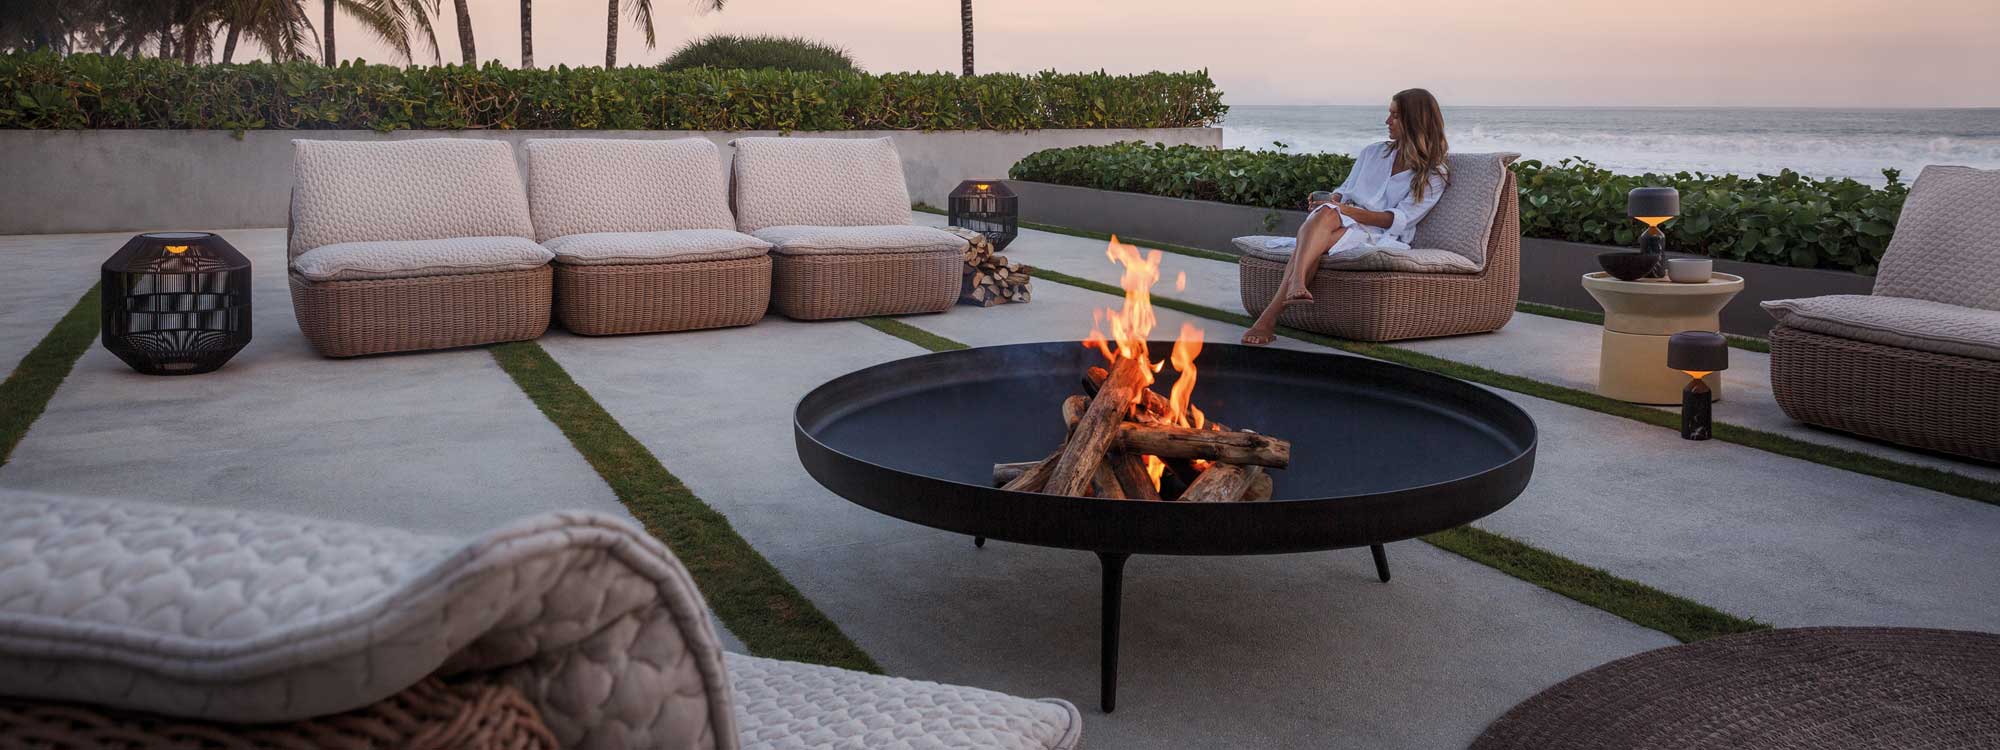 Image at dusk of sleek seaside terrace with woman relaxing on Omada contemporary wicker lounge furniture by Gloster, with roaring fire pit in the centre